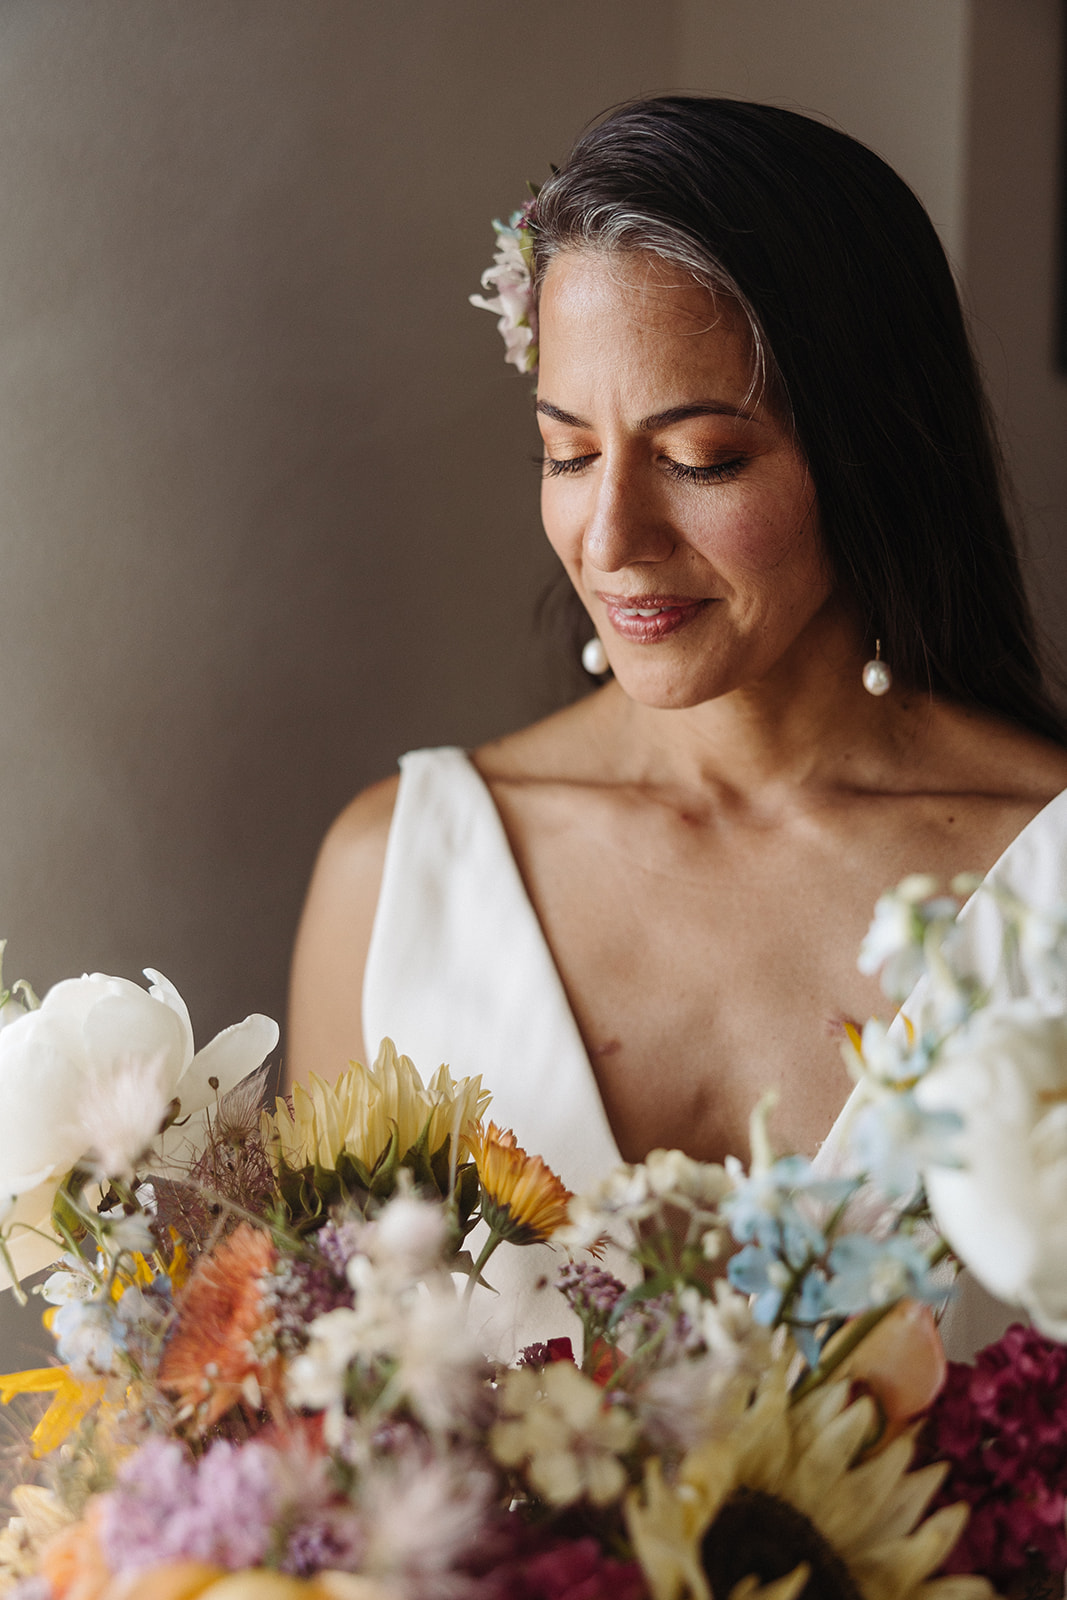 A portrait of the bride looking down at her colorful bouquet, admiring the natural beauty.